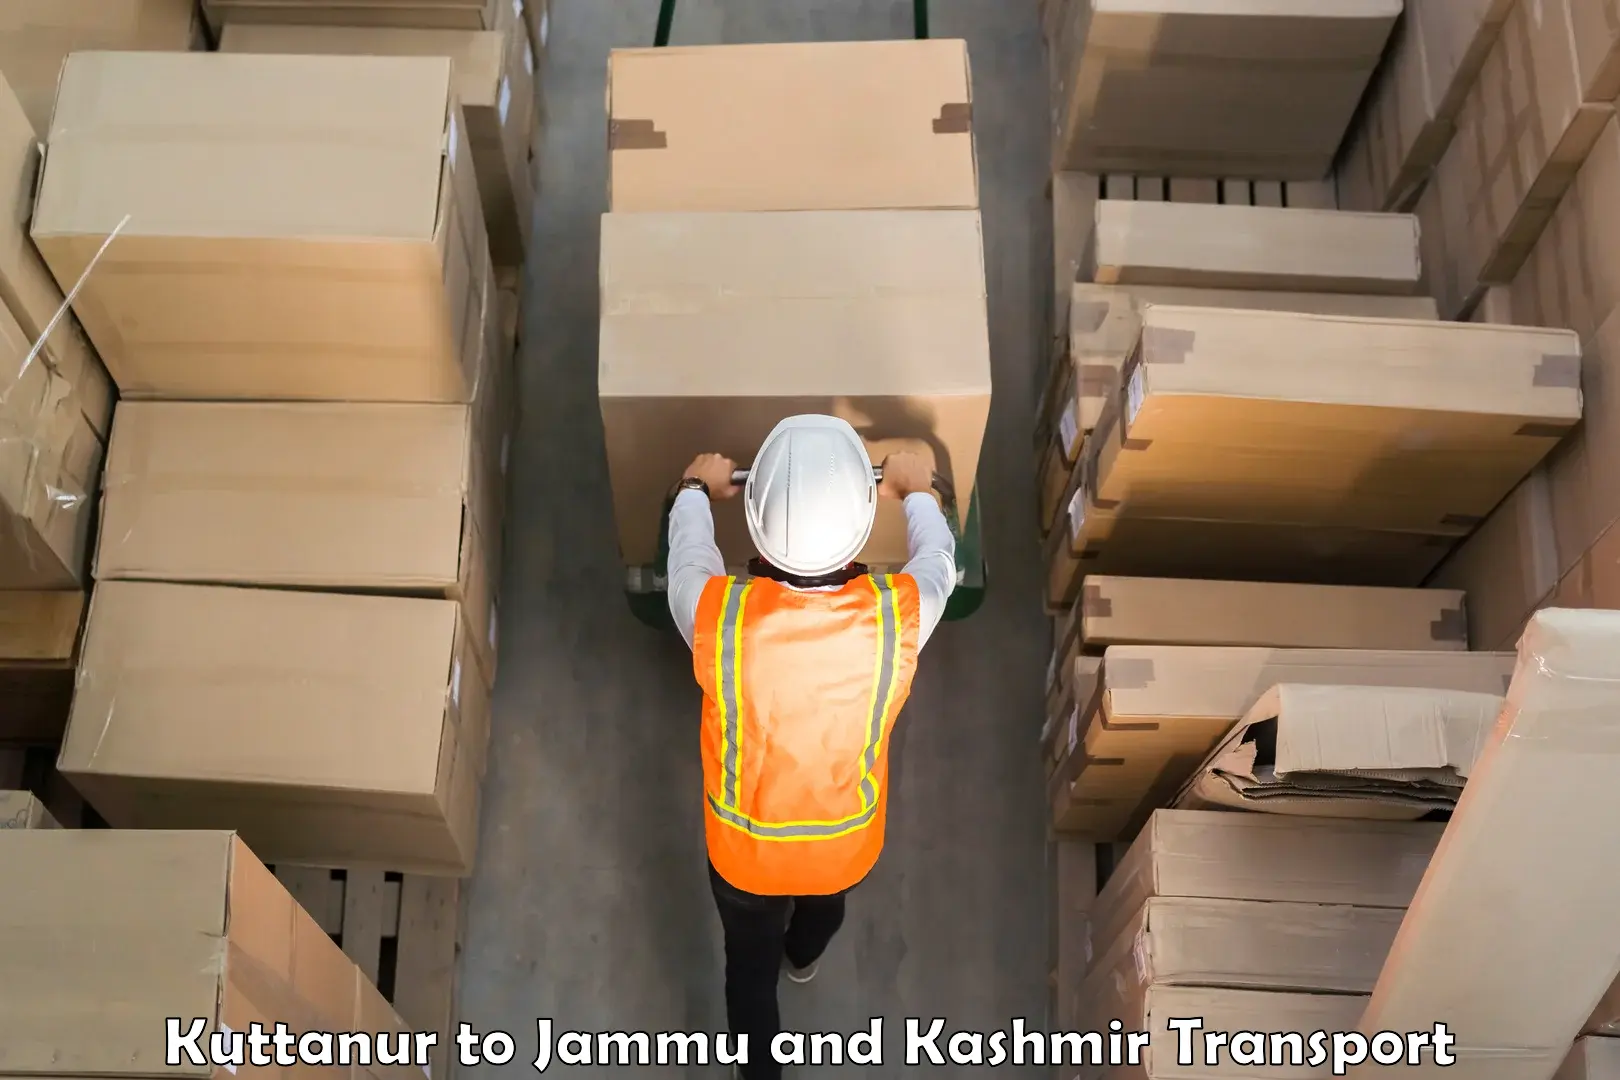 Truck transport companies in India Kuttanur to Anantnag